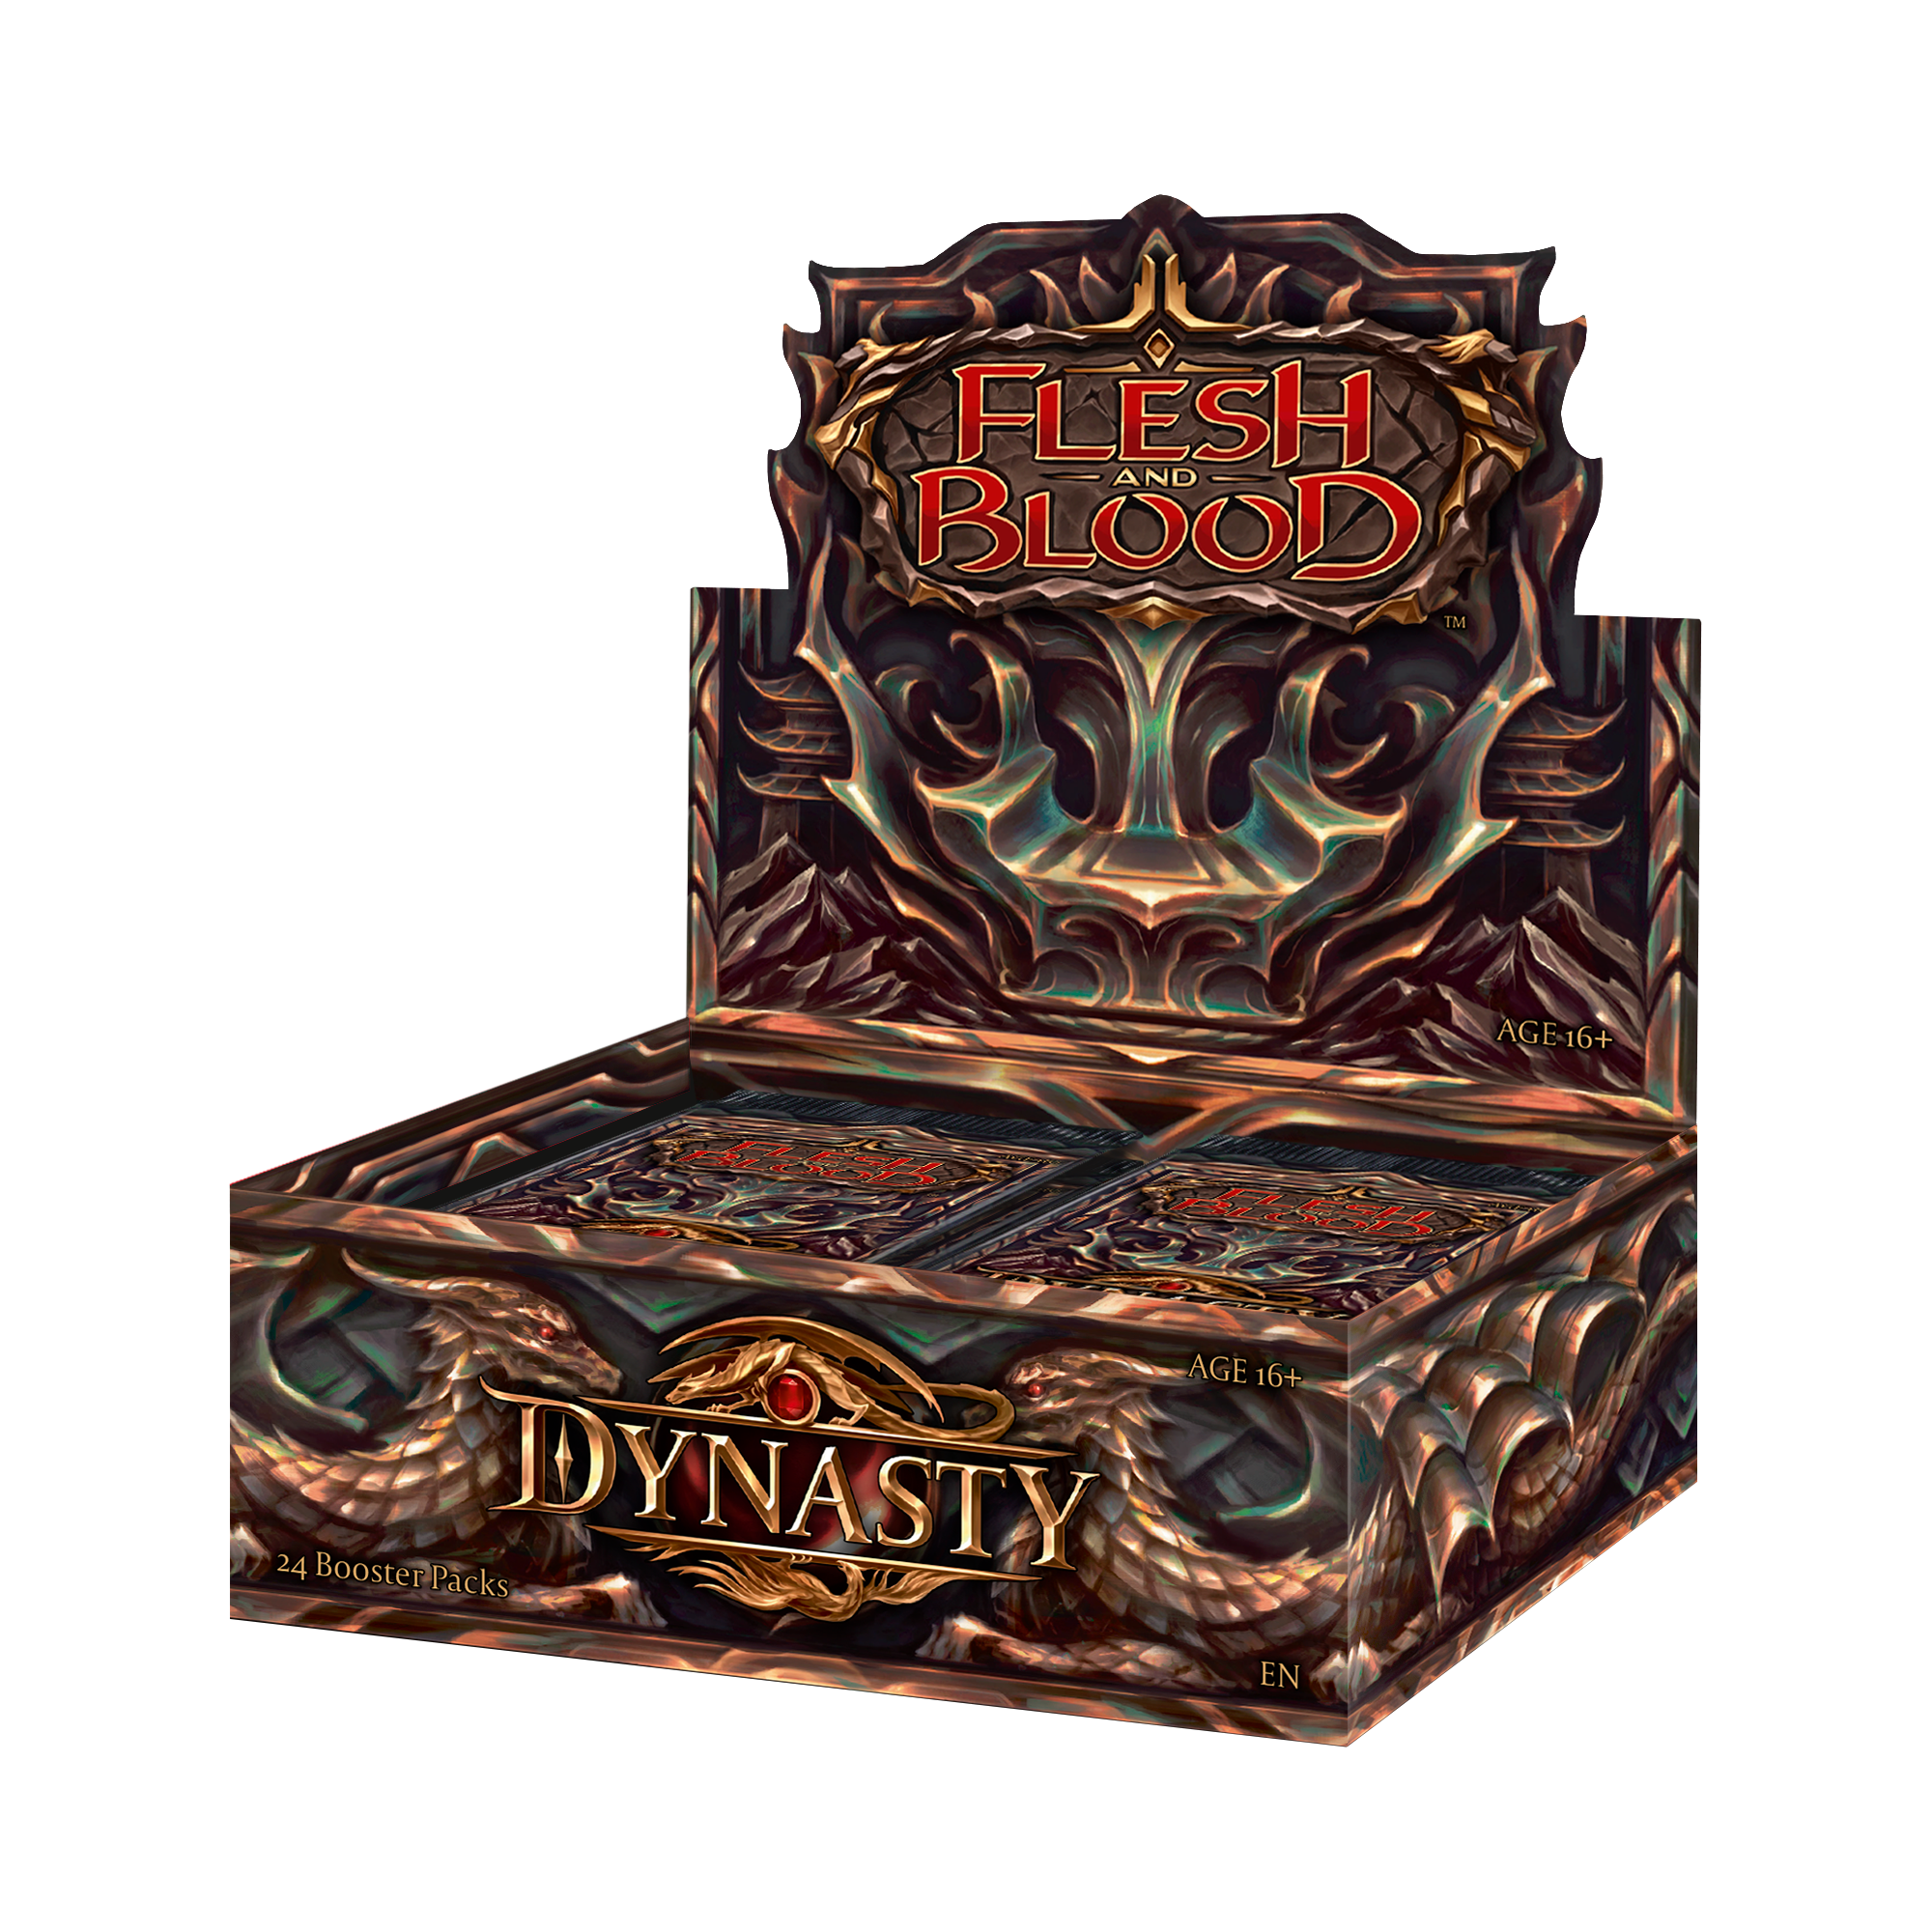 Flesh and Blood: Dynasty Booster Box